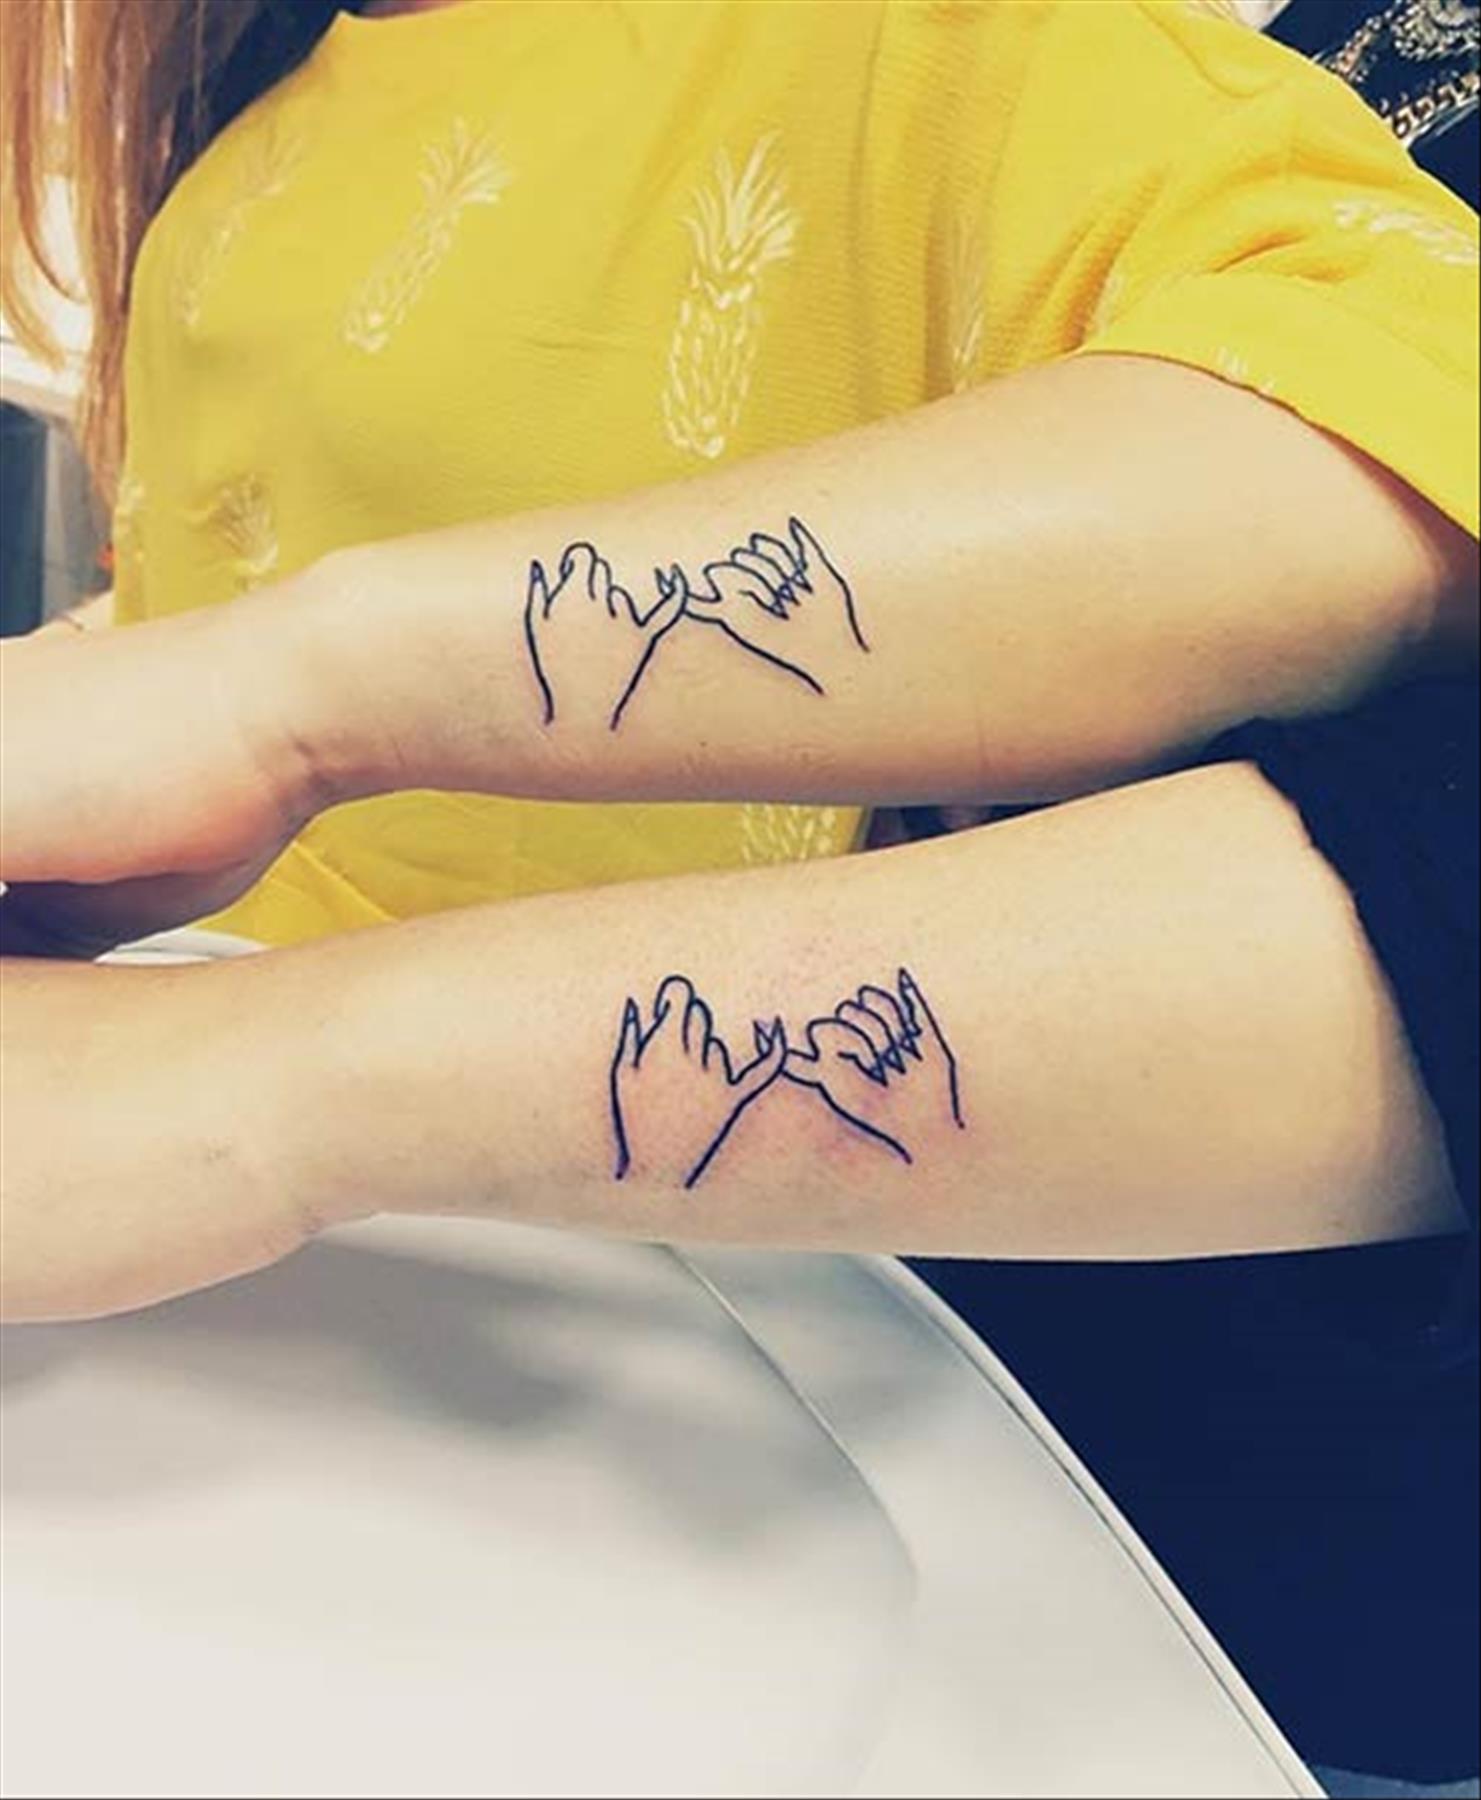 Best sister tattoo ideas with meanings